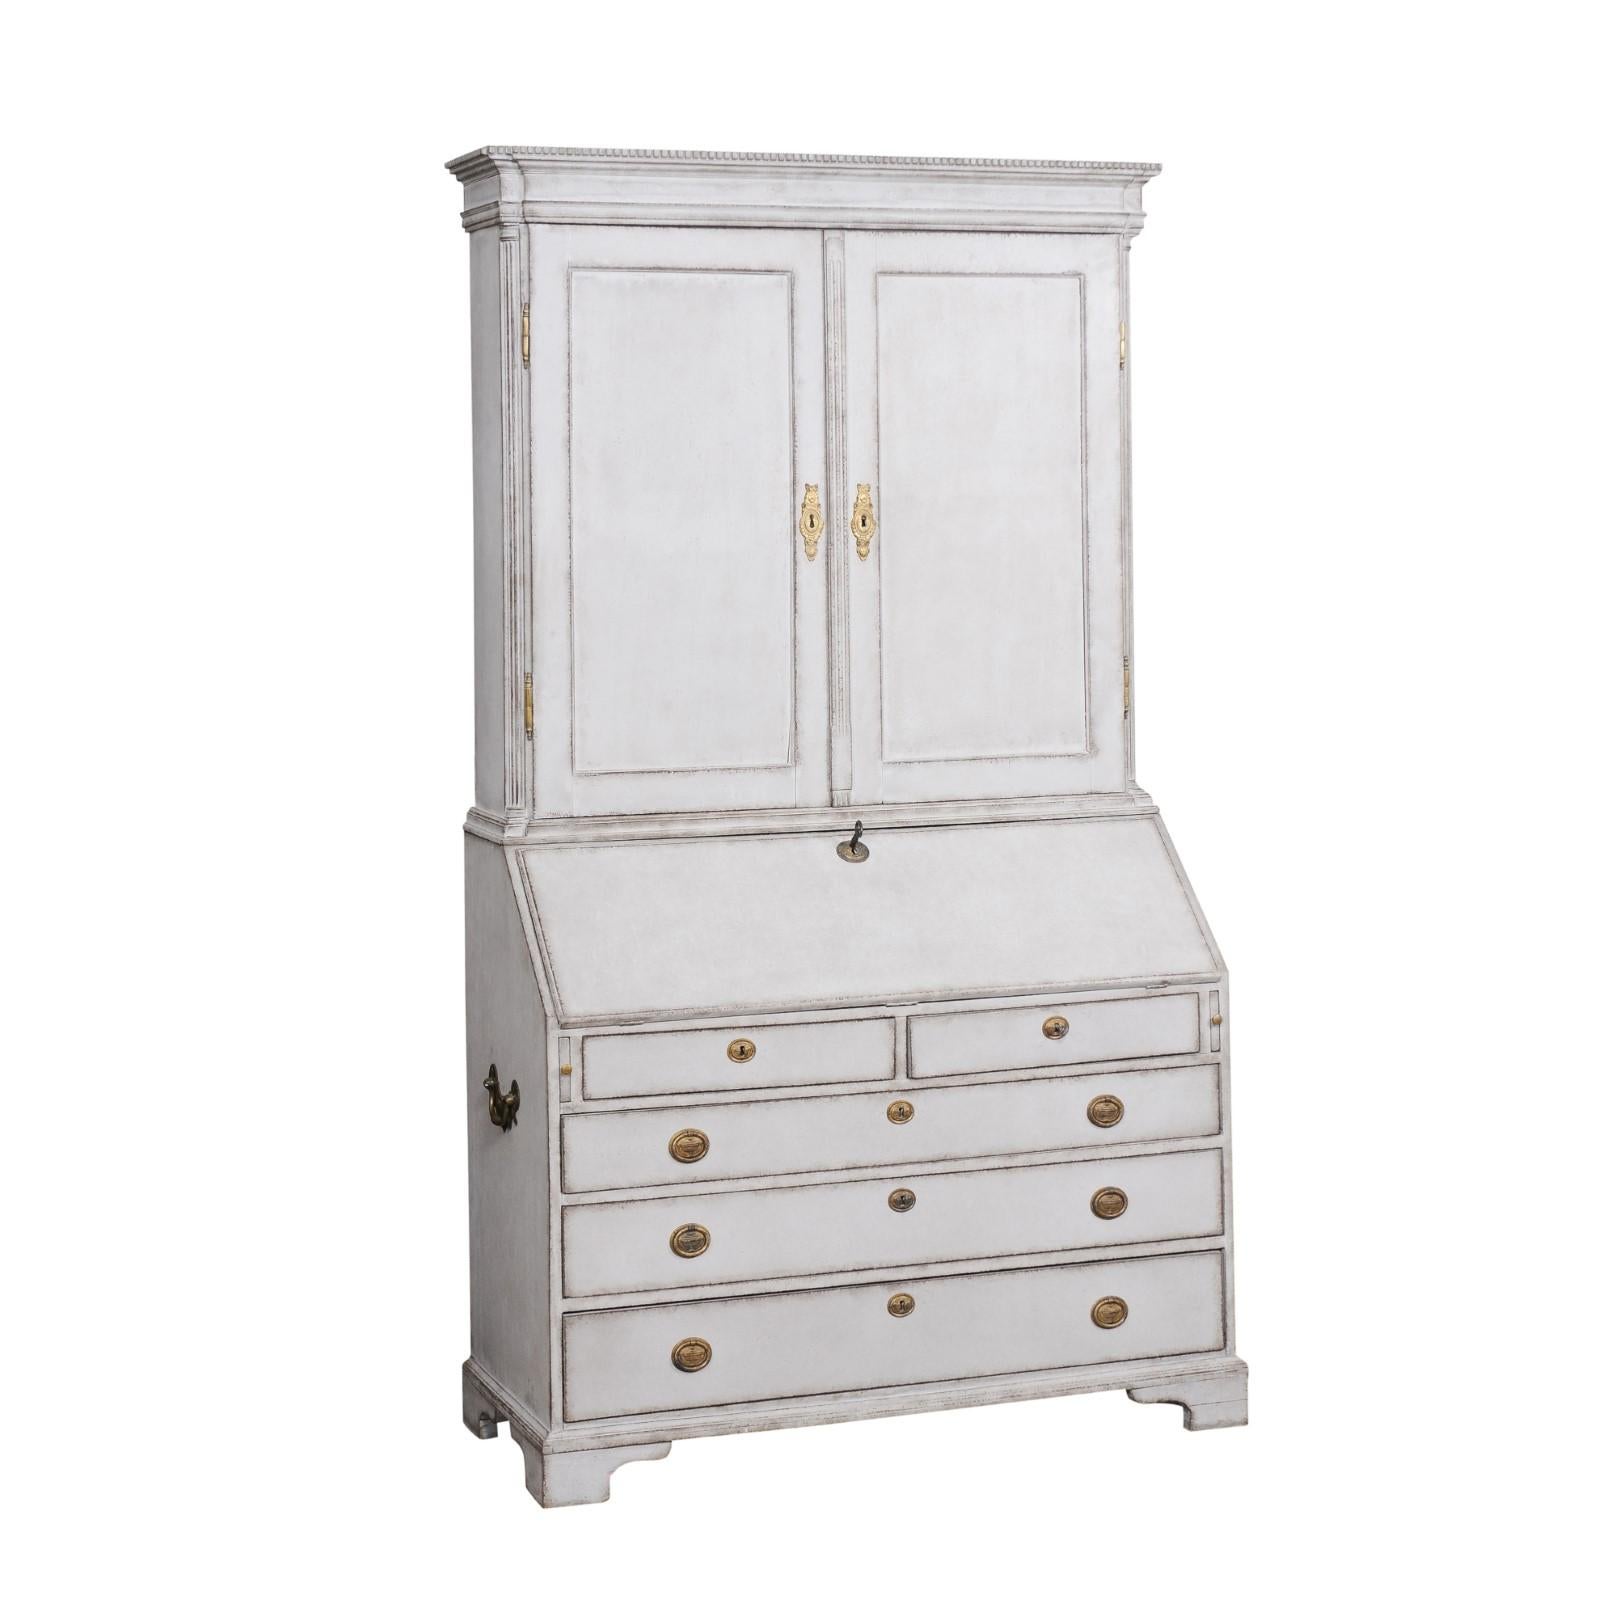 A tall European painted wood two-part secretary from the early 19th century, with molded cornice, dentil molding, slanted front desk and graduated drawers. Created in Europe during the early years of the 19th century, this tall painted wood